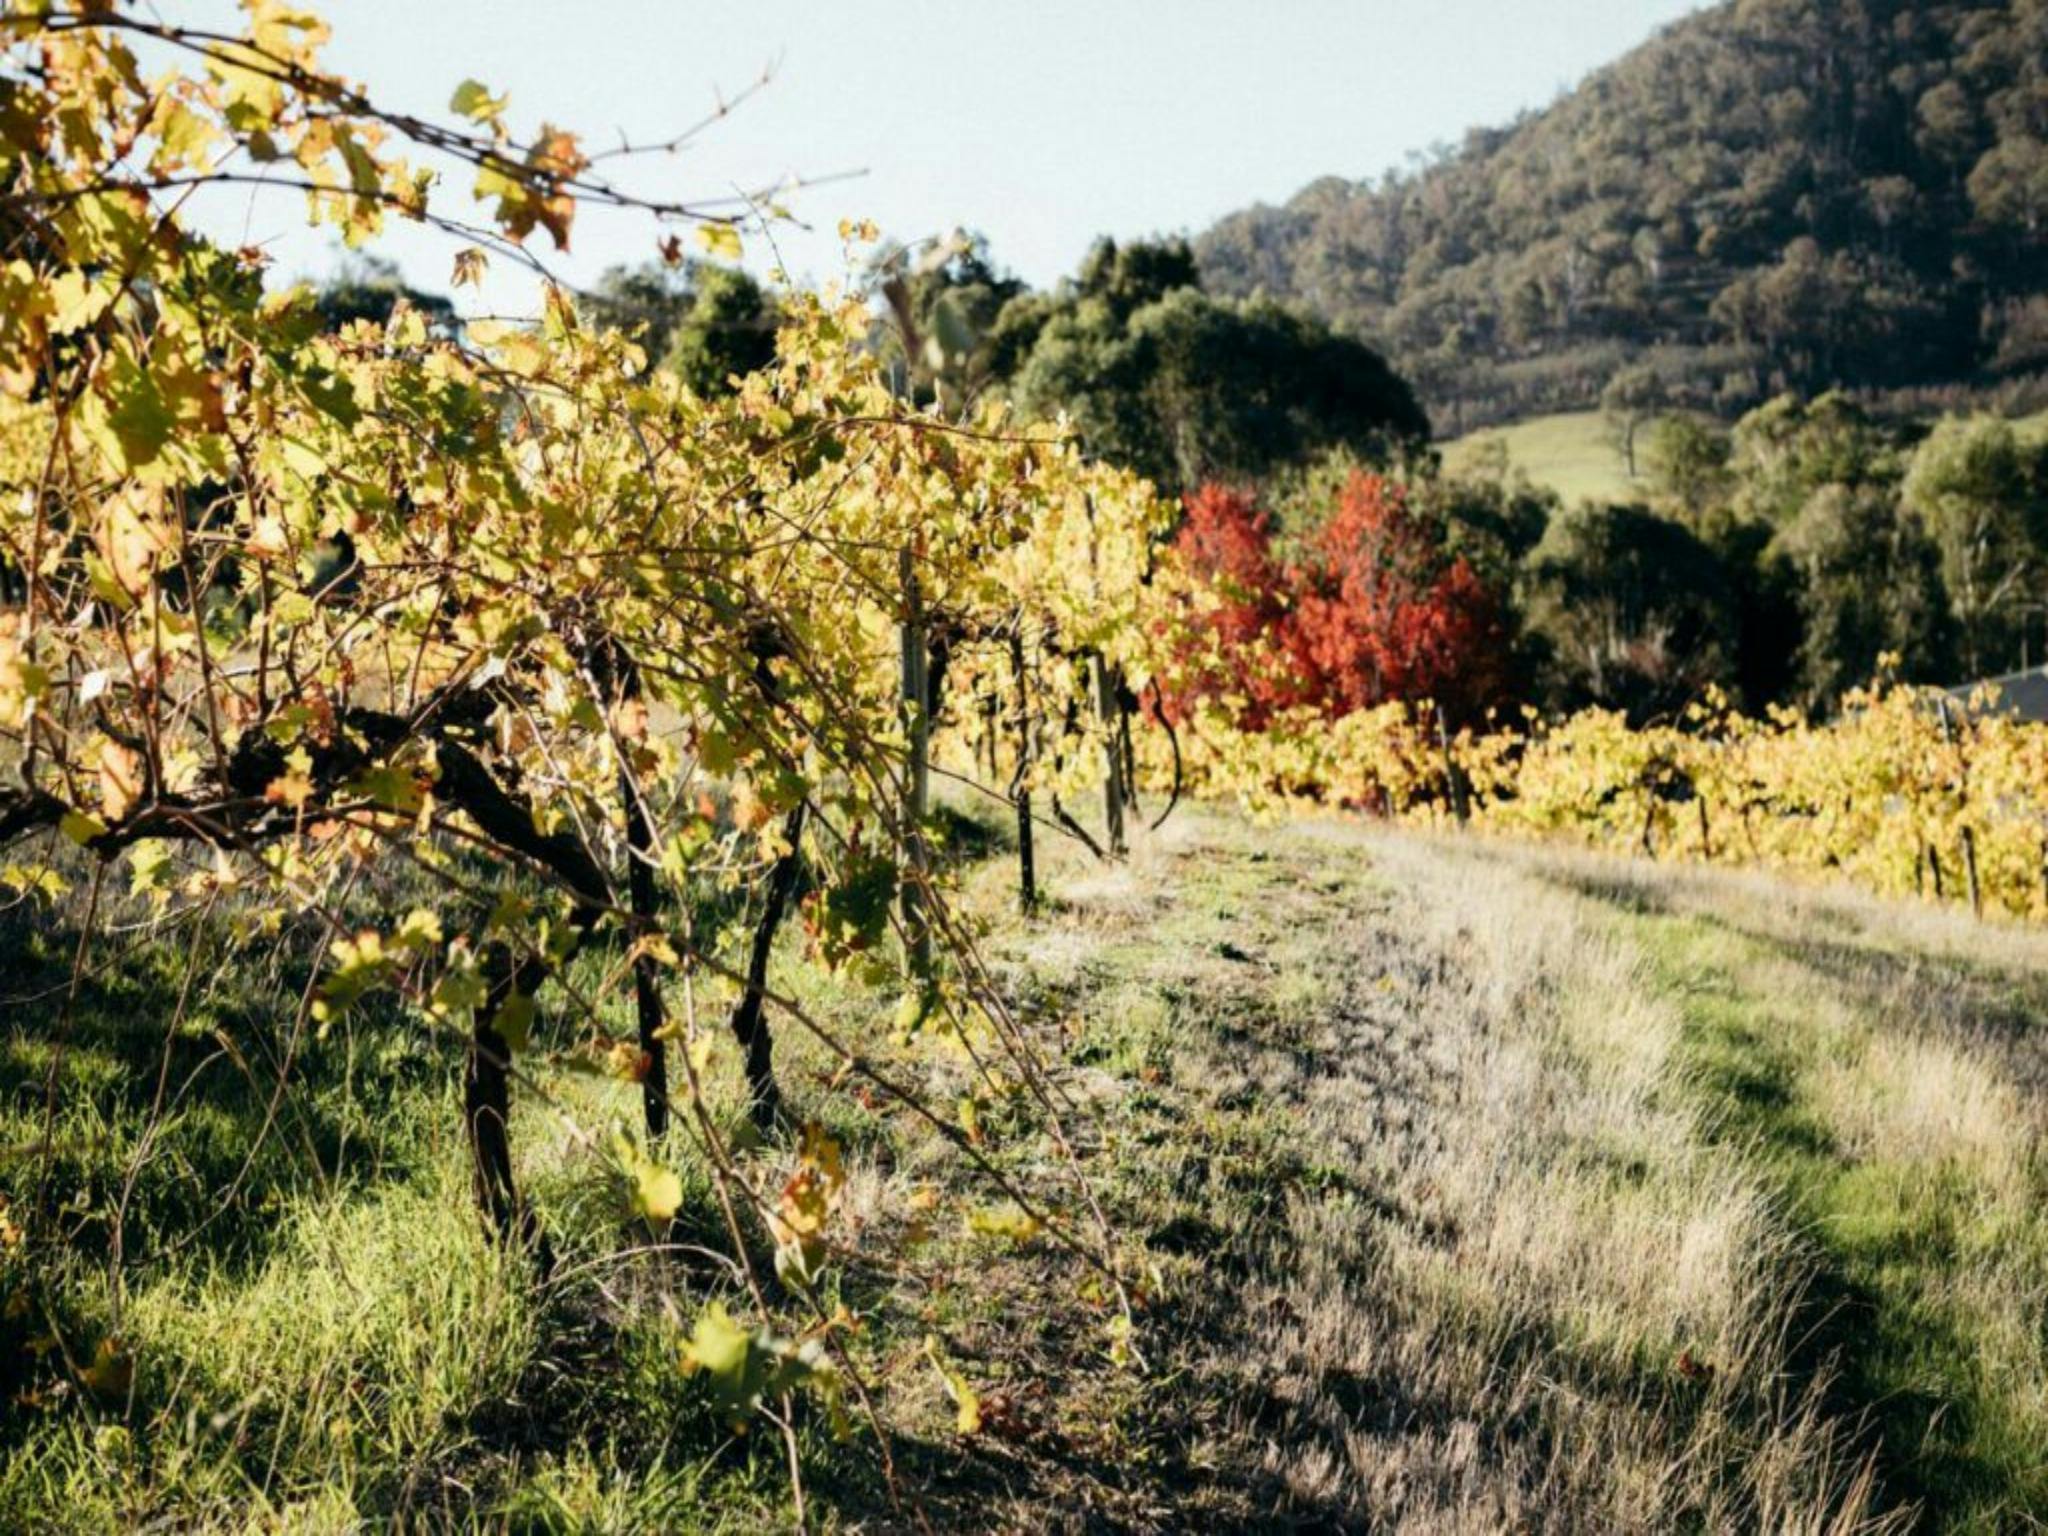 A row of grapevines, in Autumn colours, sun shining